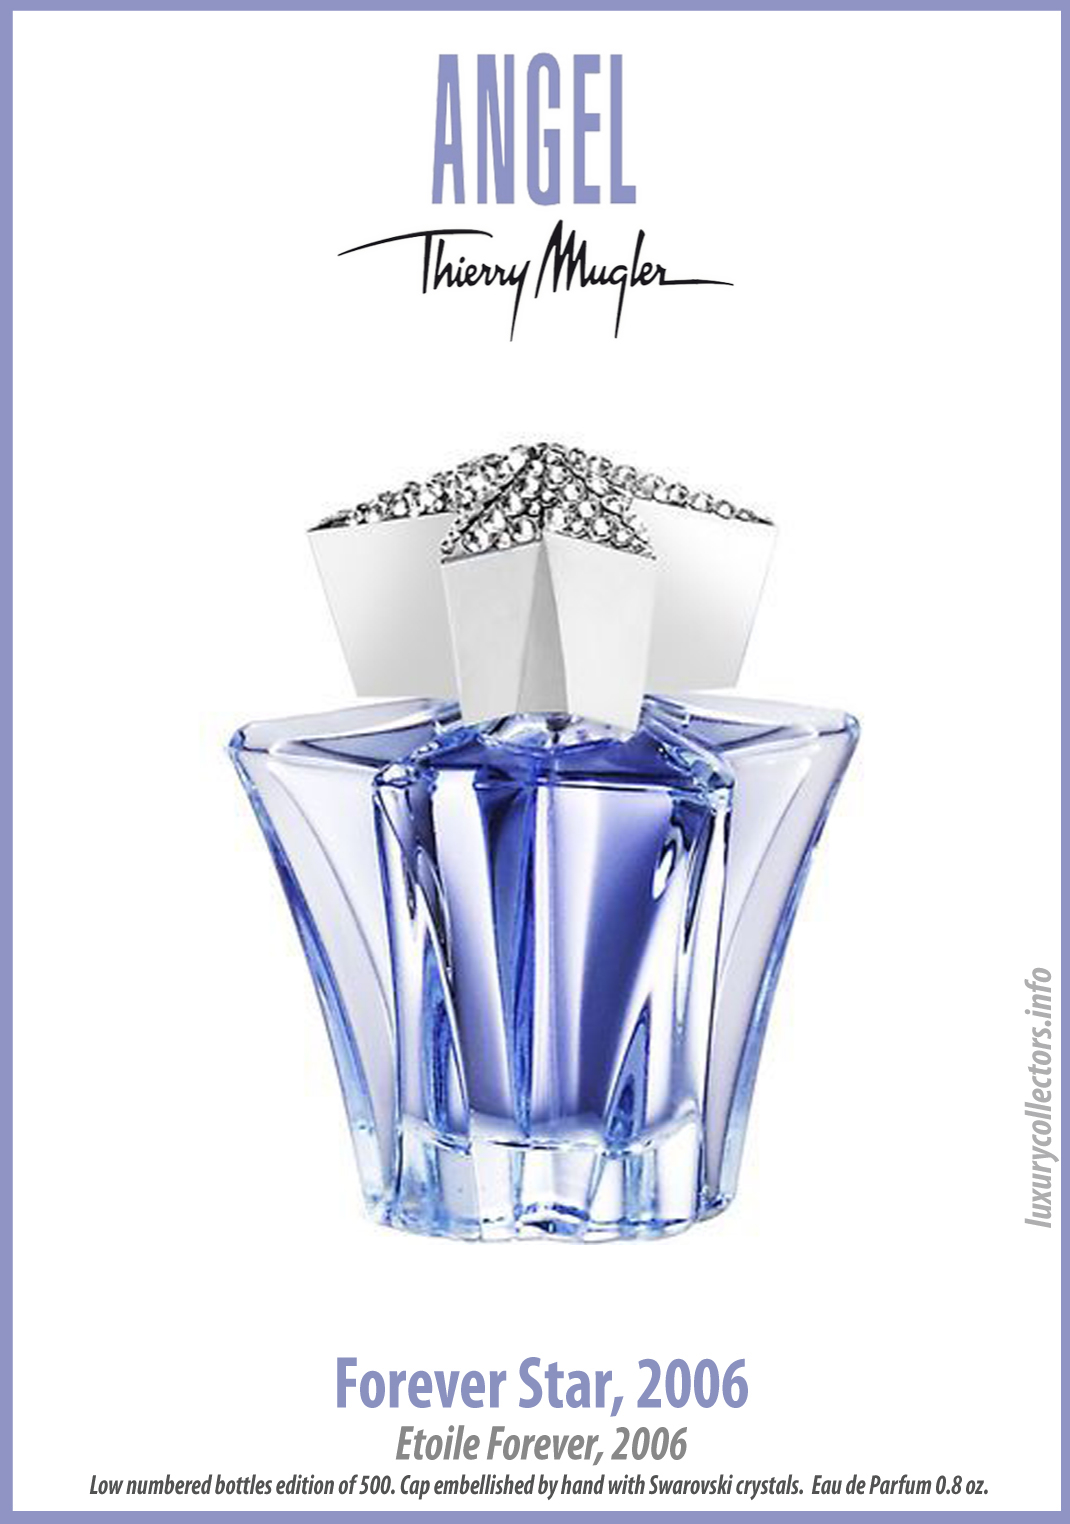 Thierry Mugler Angel Perfume Collector's Limited Edition Bottle 2006 Forever Star Swarovski Crystals Stopper